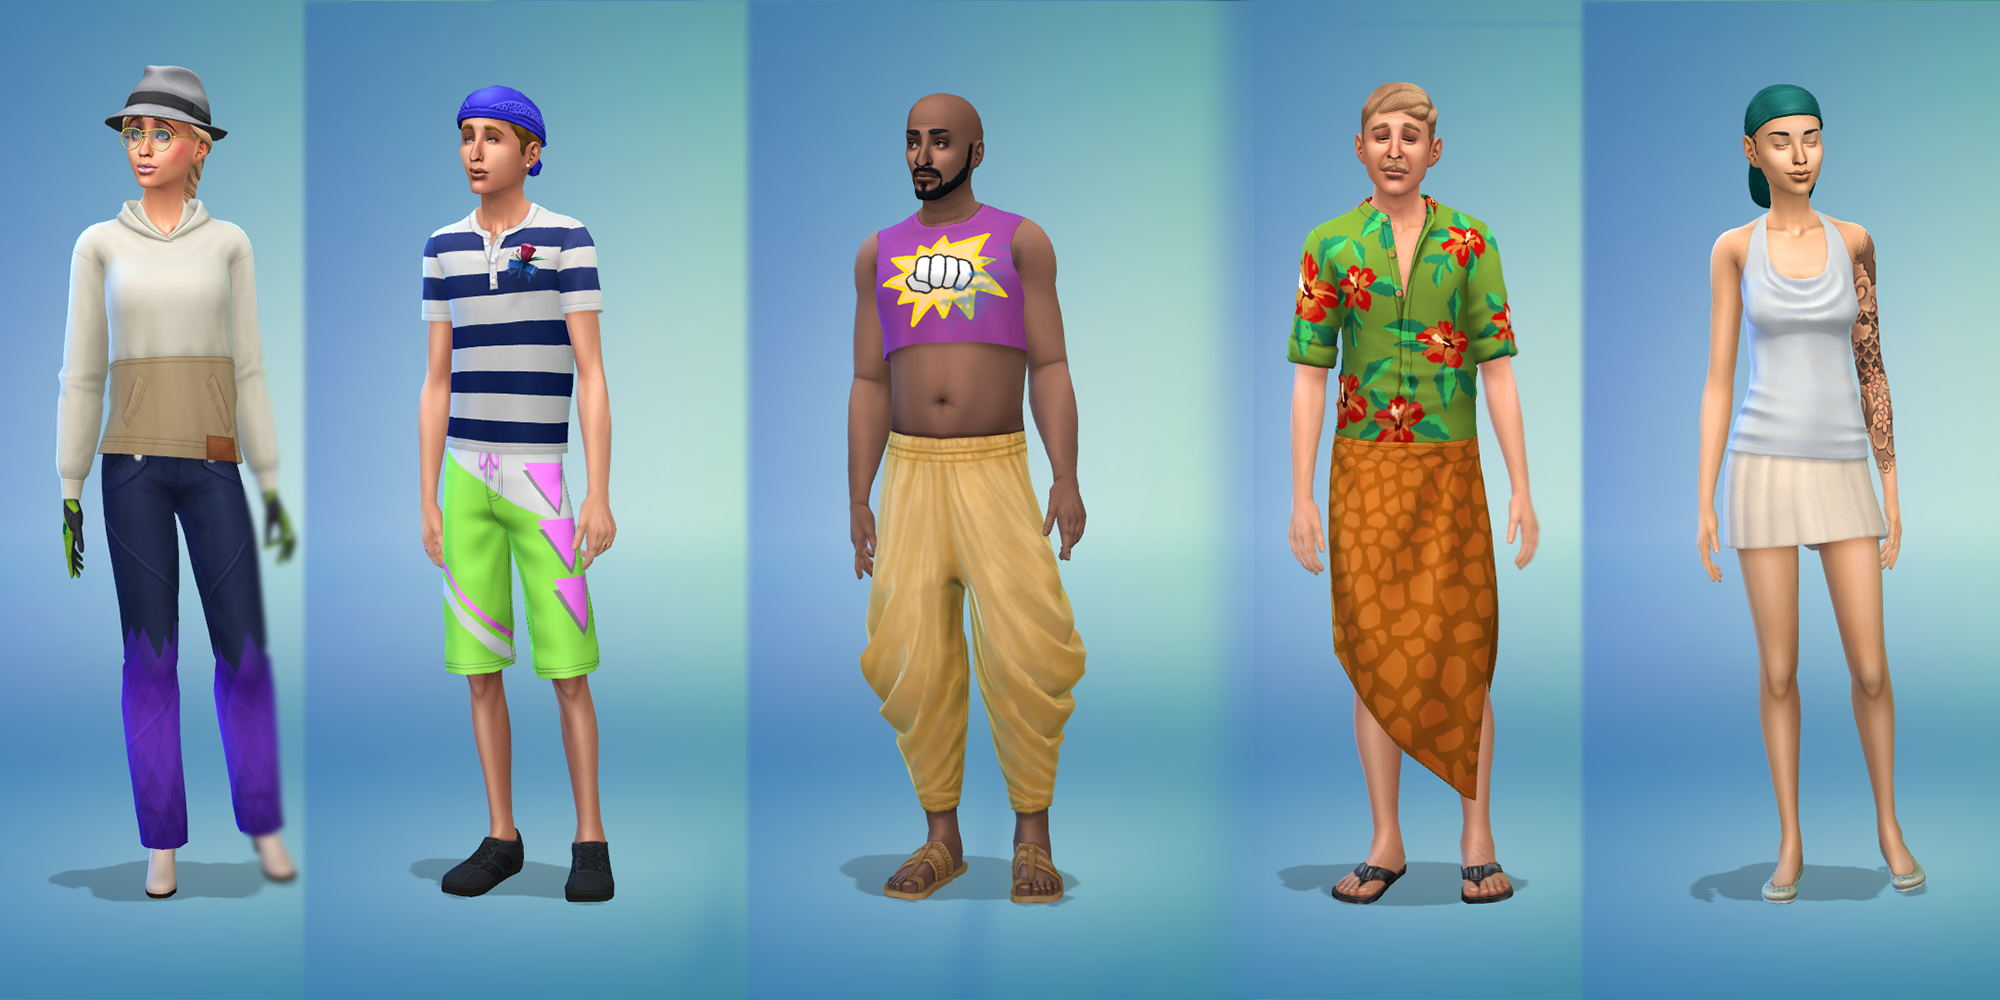 Various Sims from the base game wear randomly generated hot and cold weather outfits